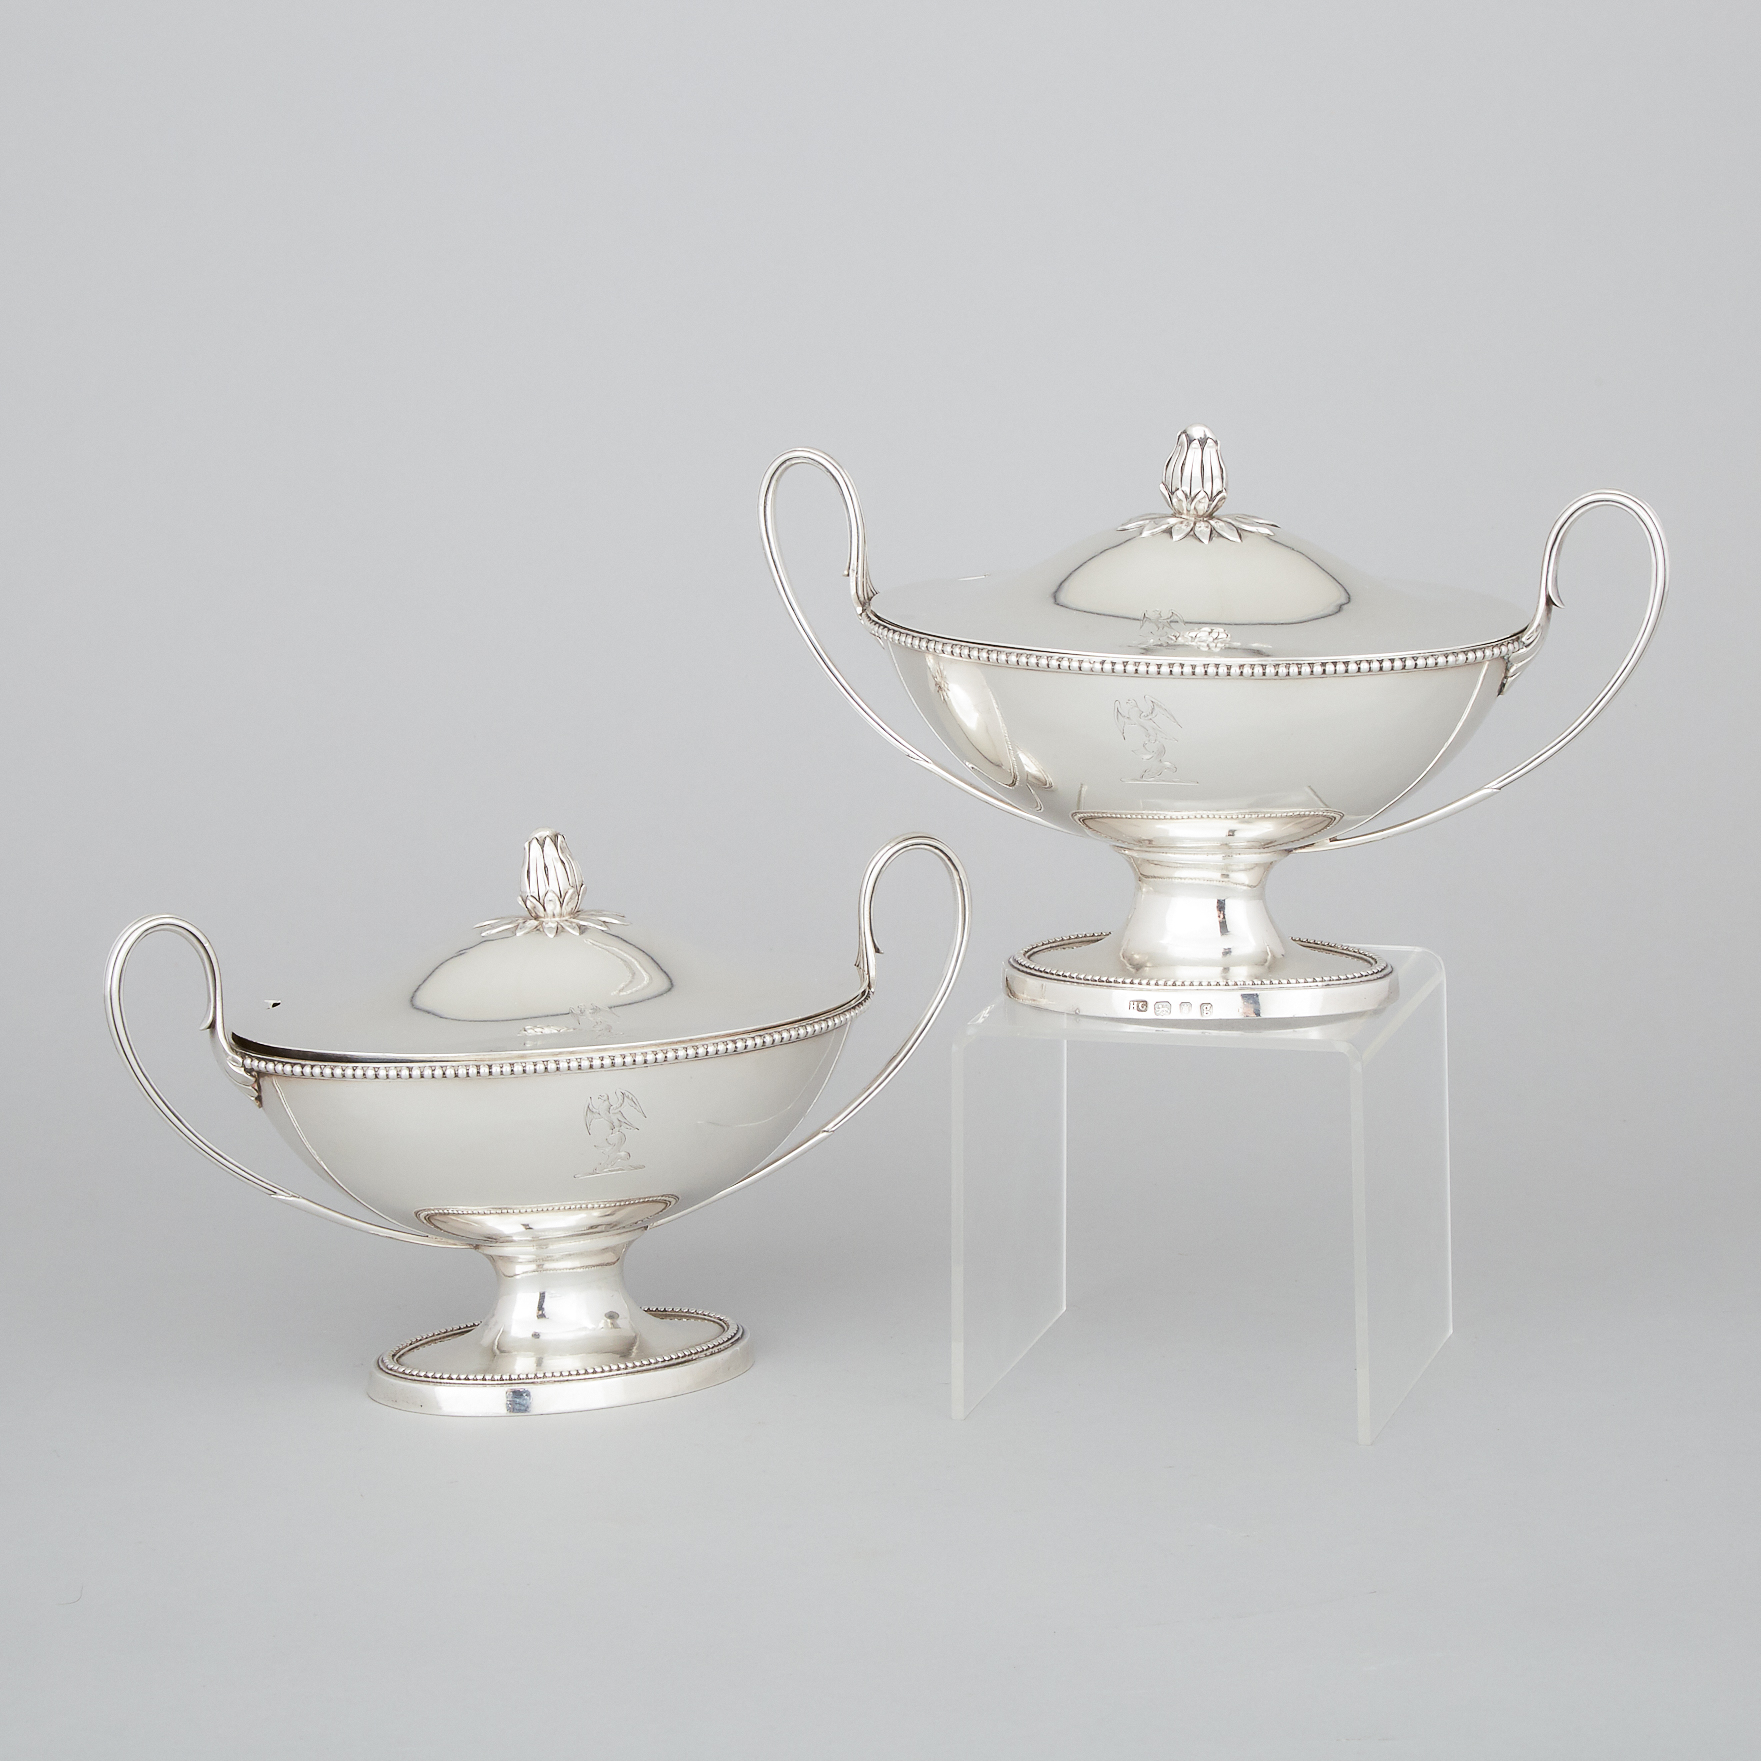 Pair of George III Silver Oval Sauce Tureens and Covers, Henry Greenway, London, 1782